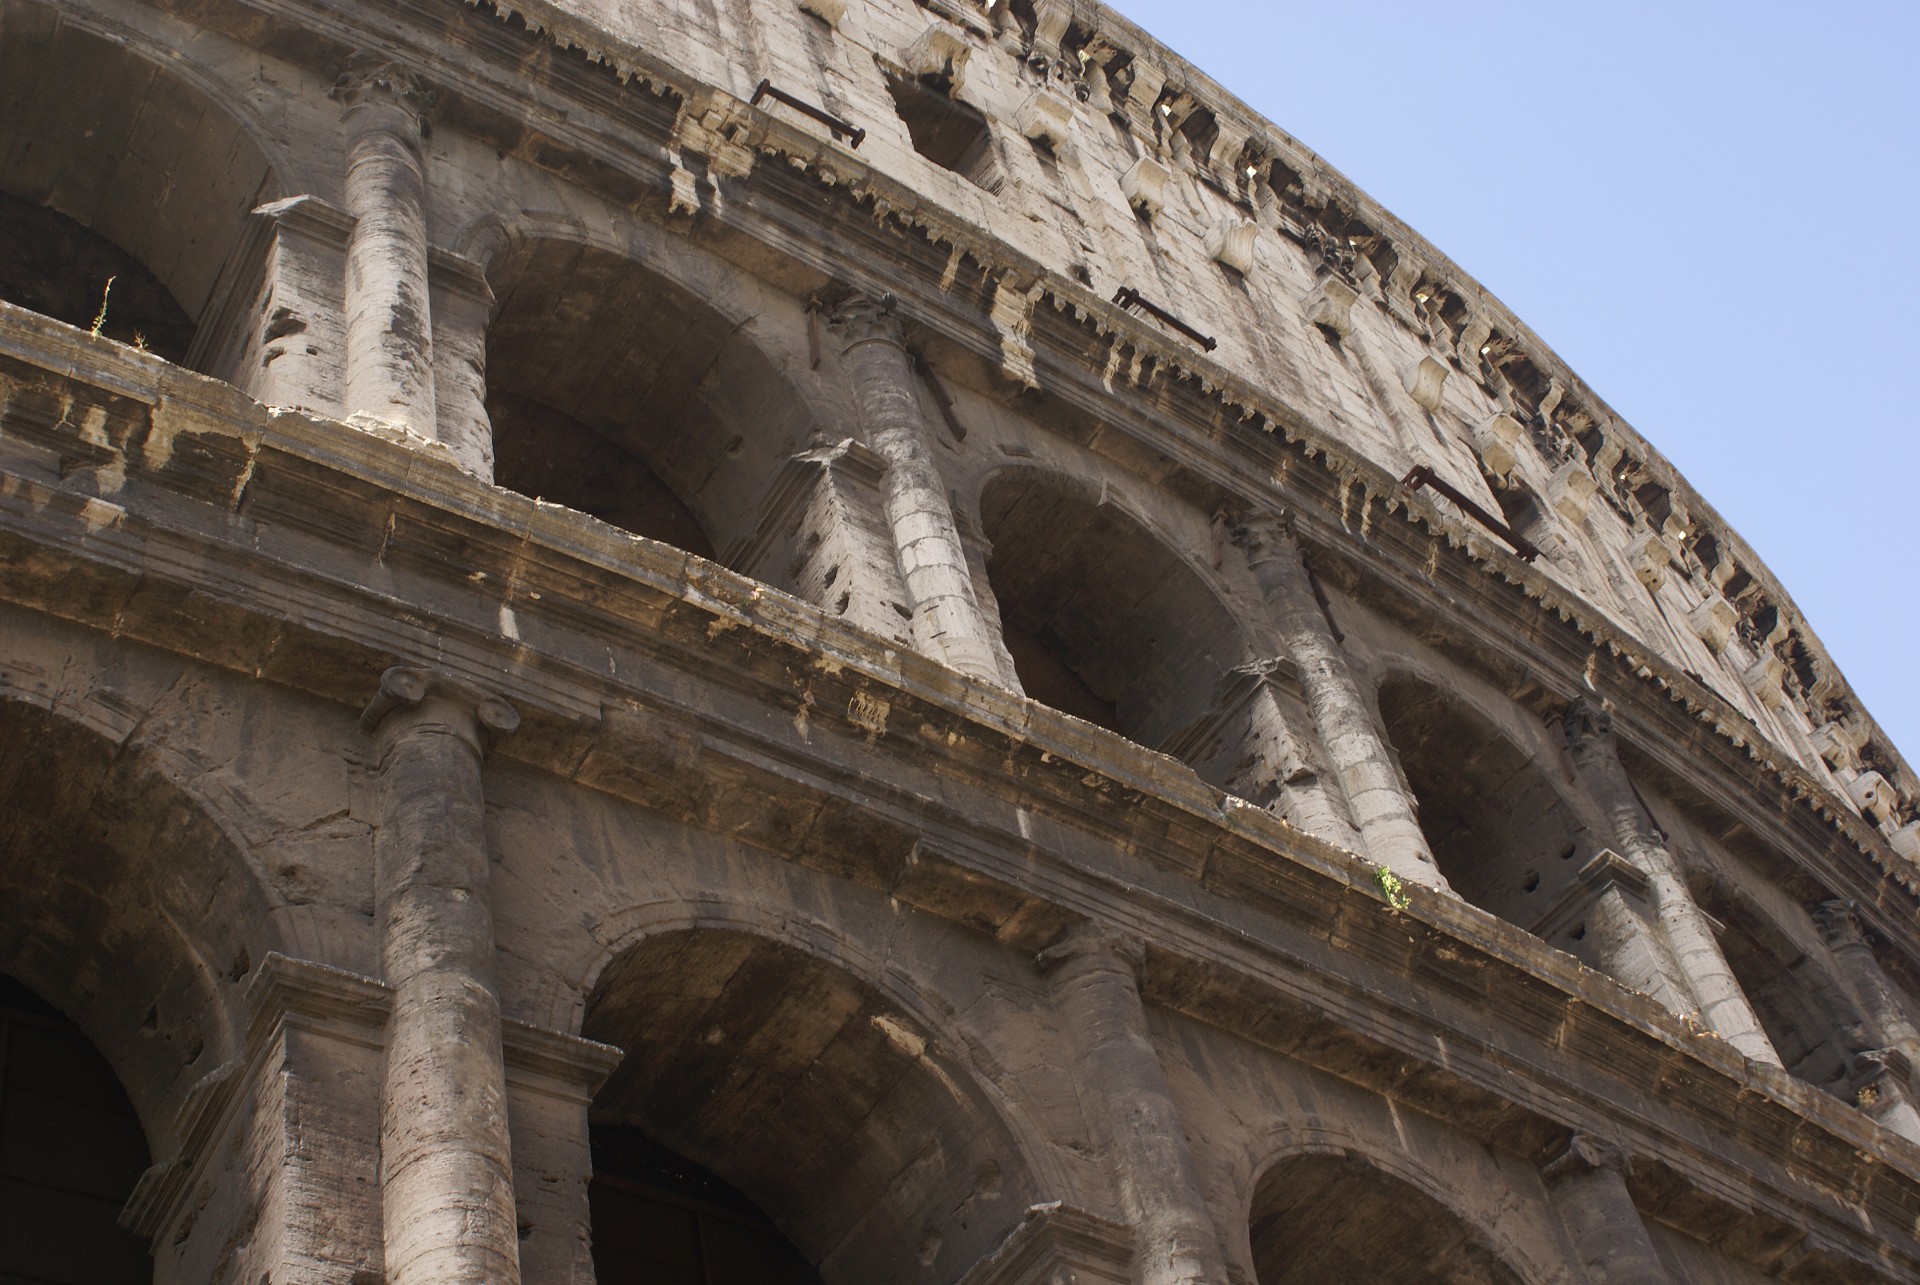 Detail of the Roman Colosseum, the largest amphitheater in the world